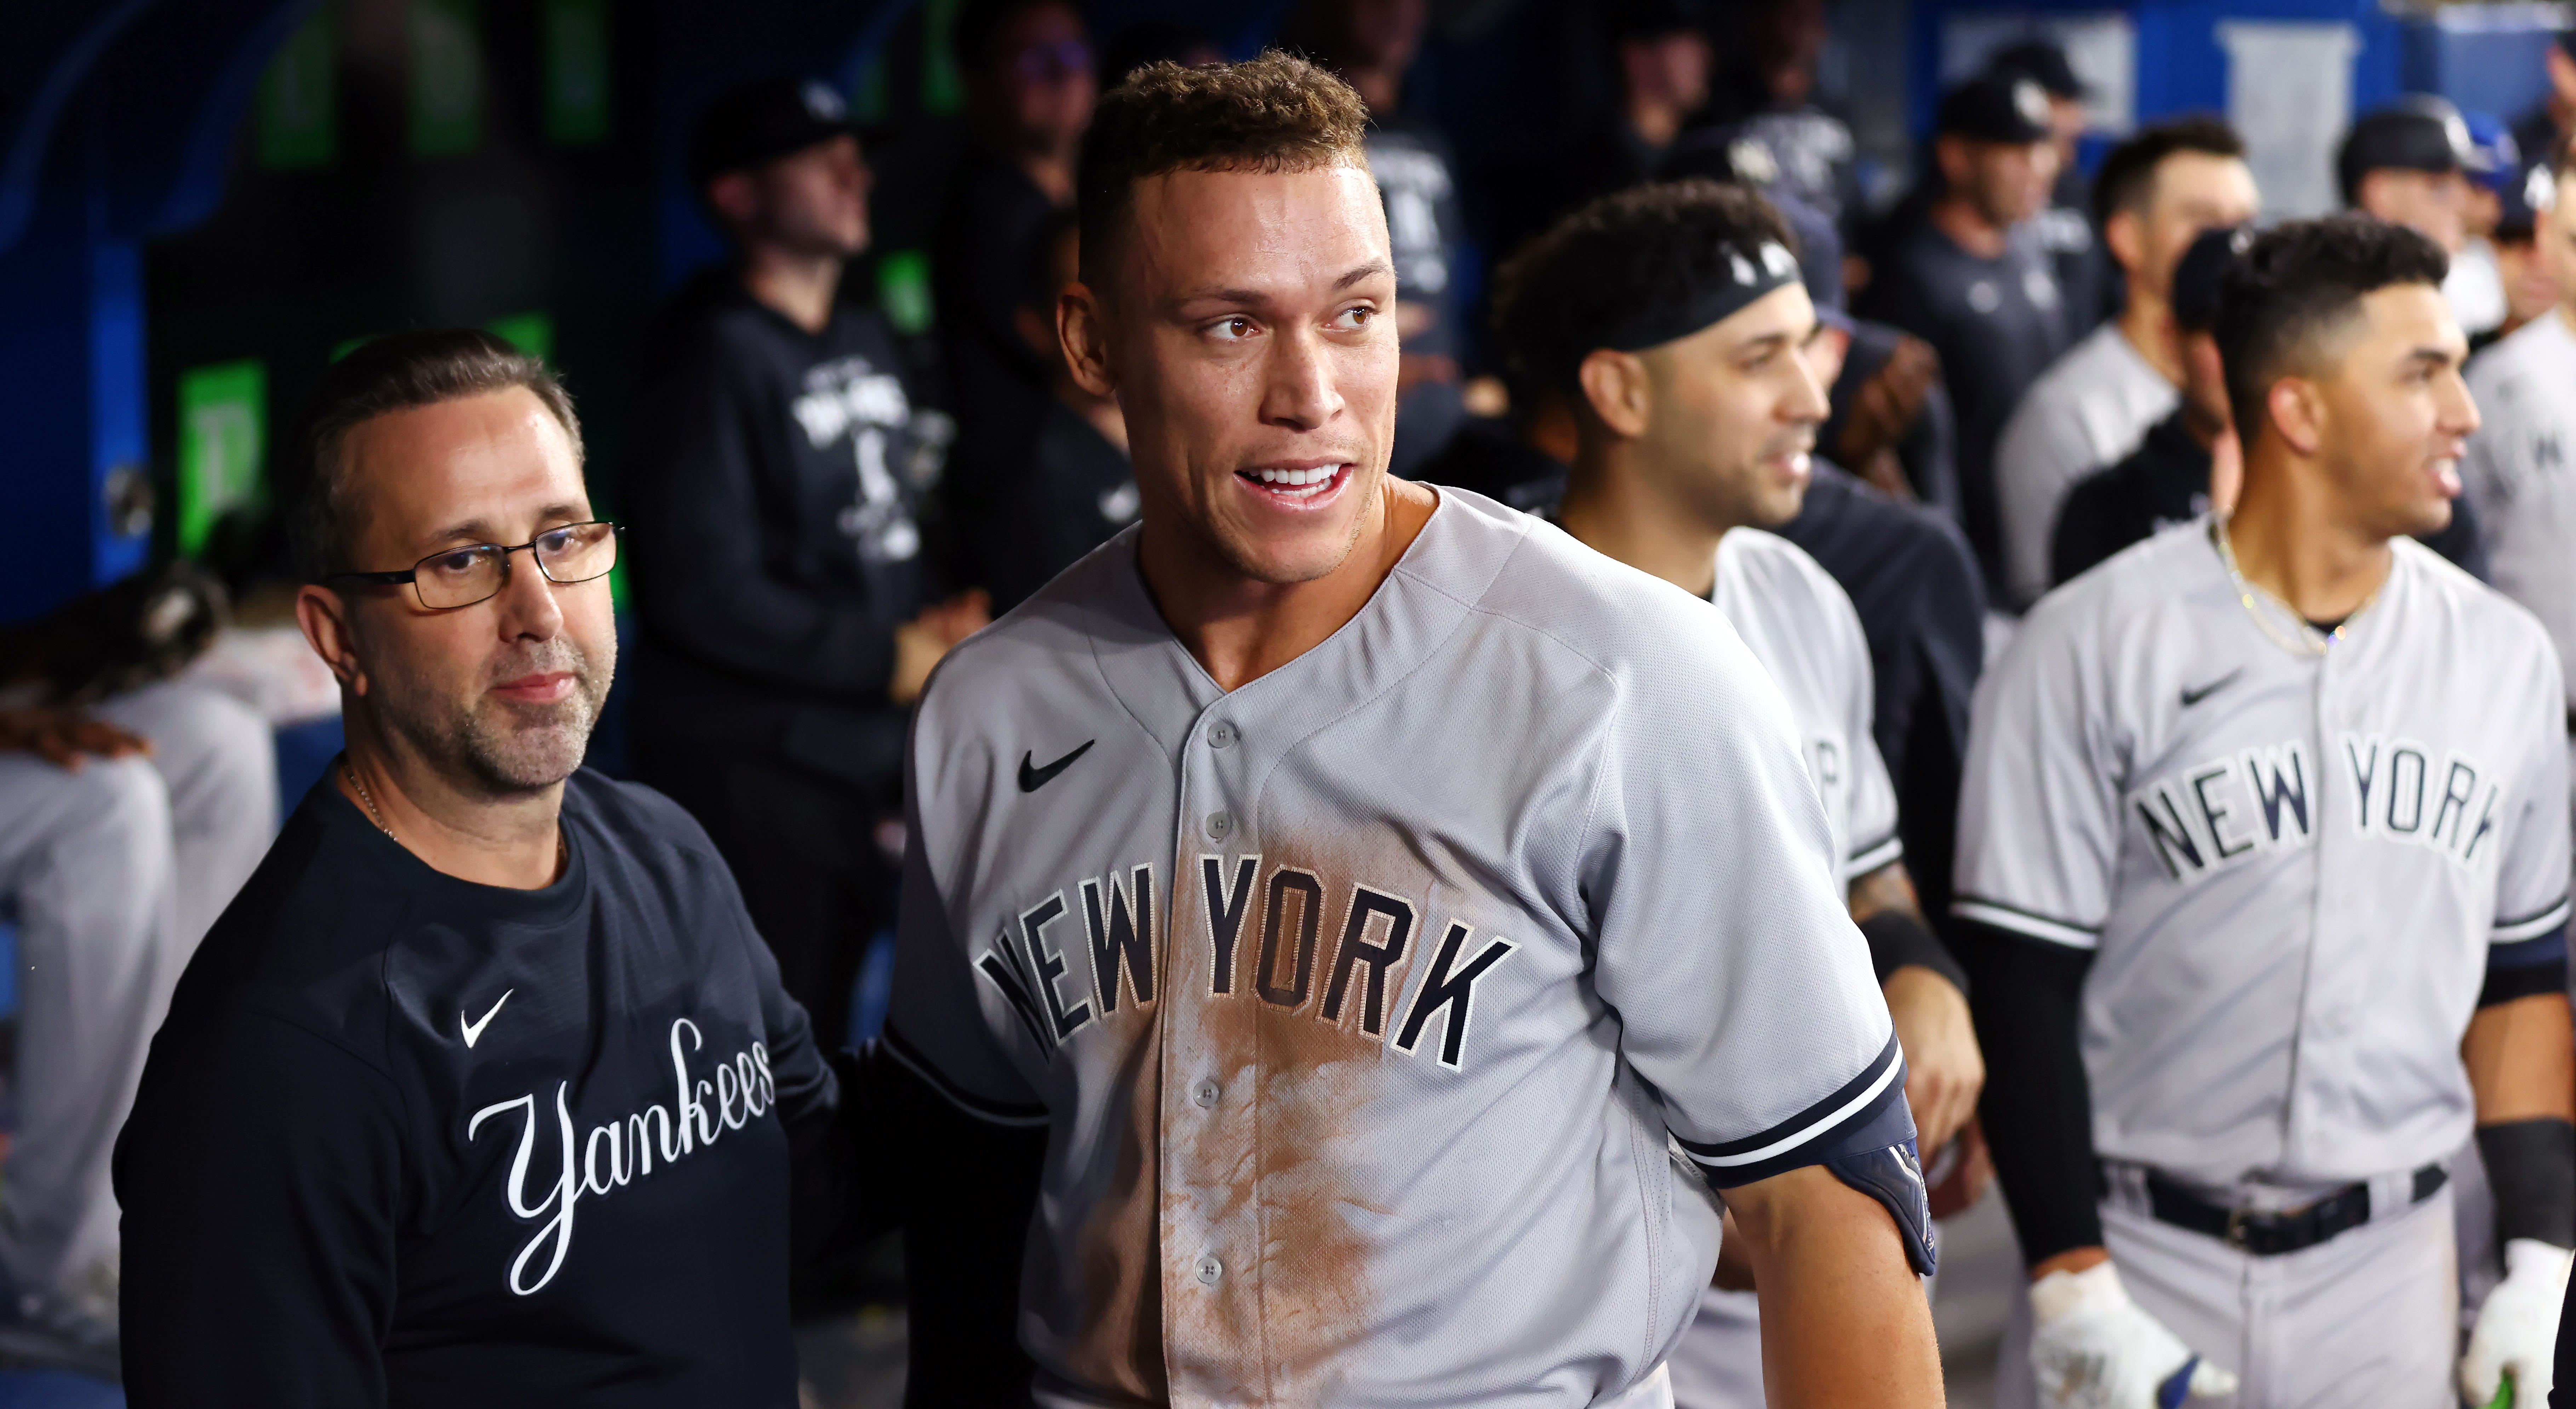 Aaron Judge's 61st home run came this close to being caught by fan